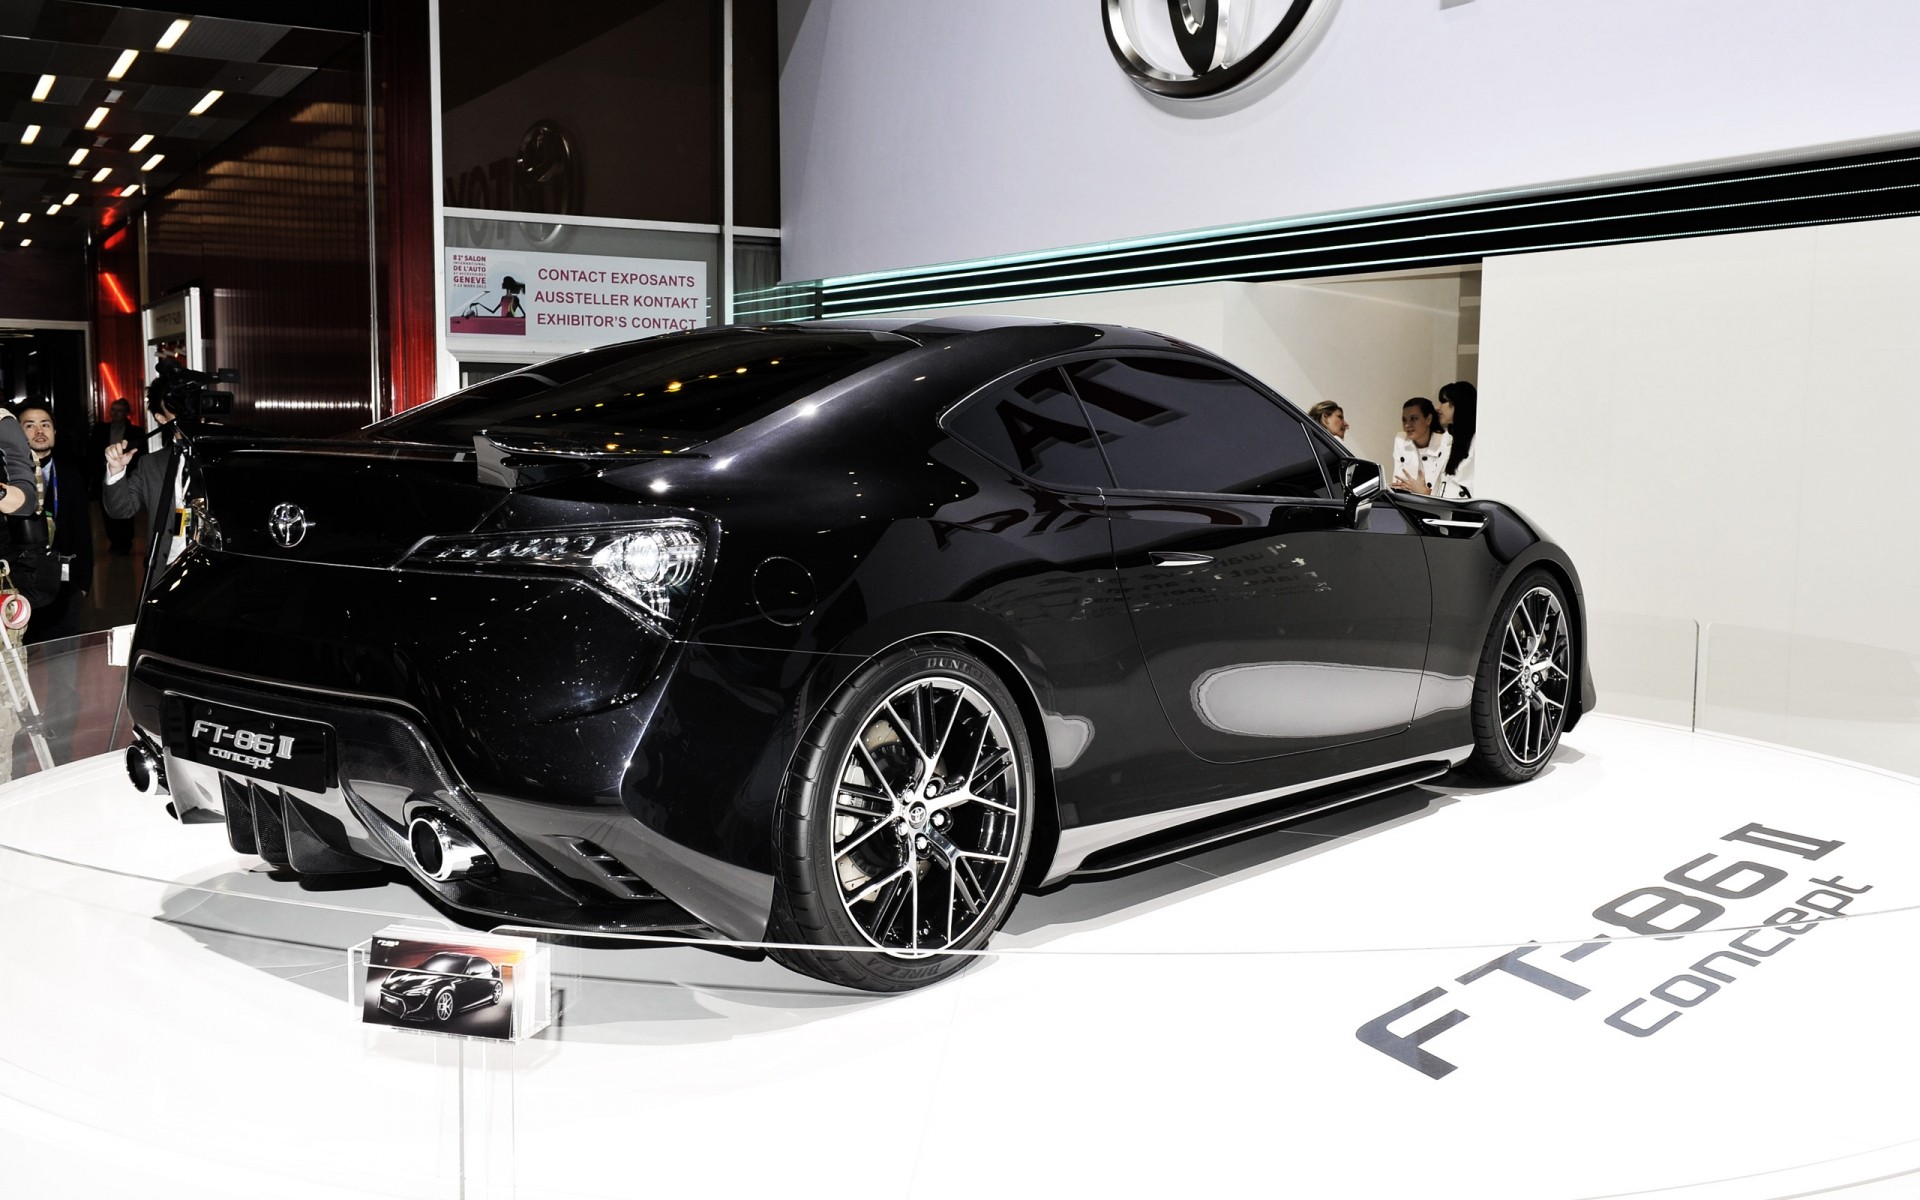 concept cars car vehicle transportation system automotive drive power fast wheel exhibition luxury speed